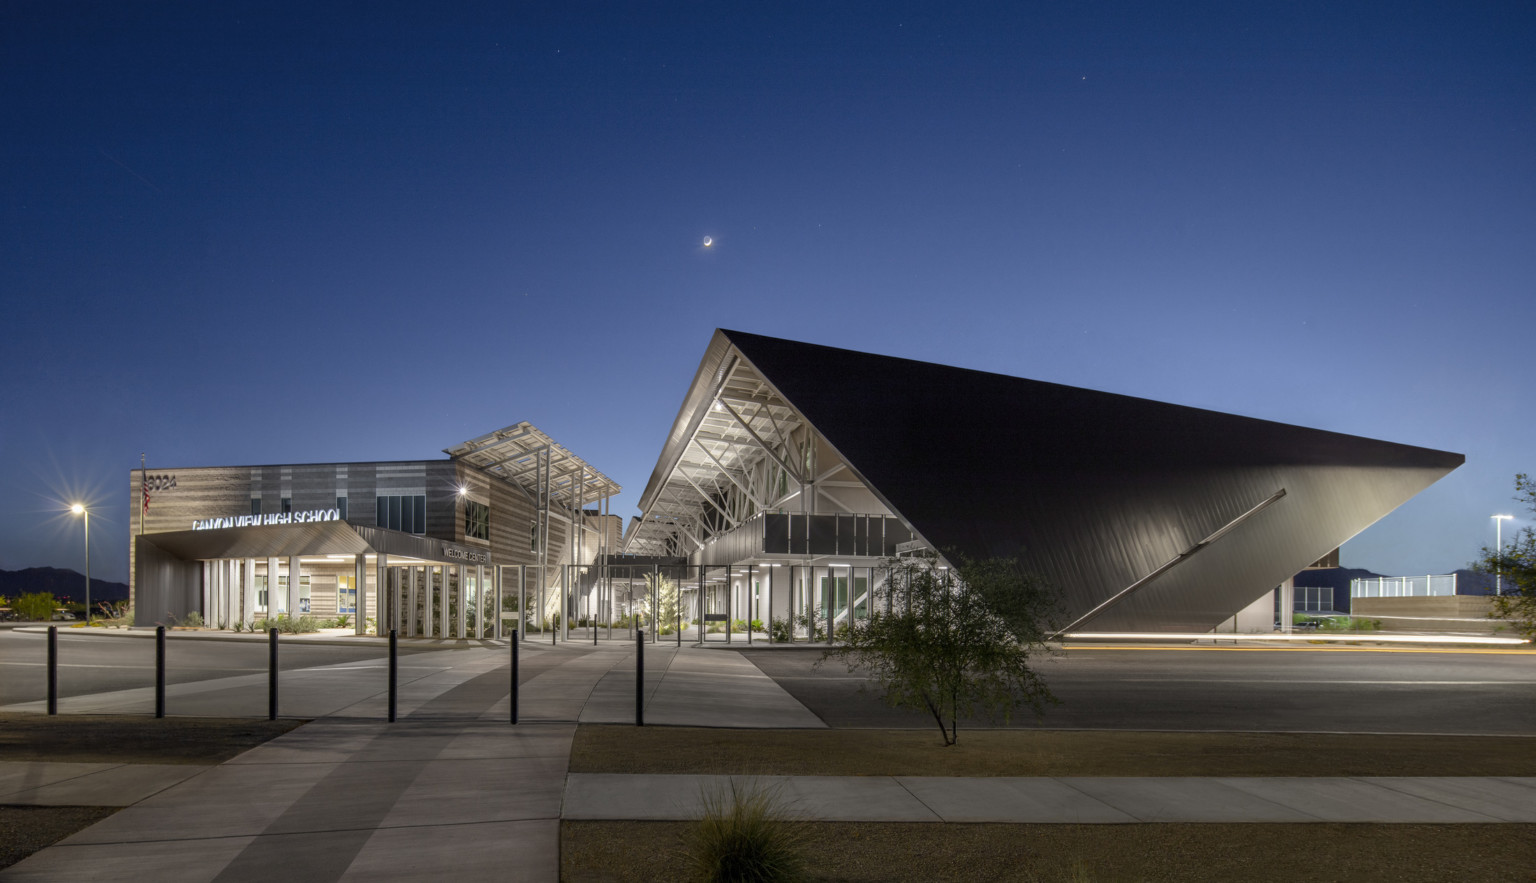 Modern steel building with exposed structural beams and solar canopies, night photography, steel roof, school, high school